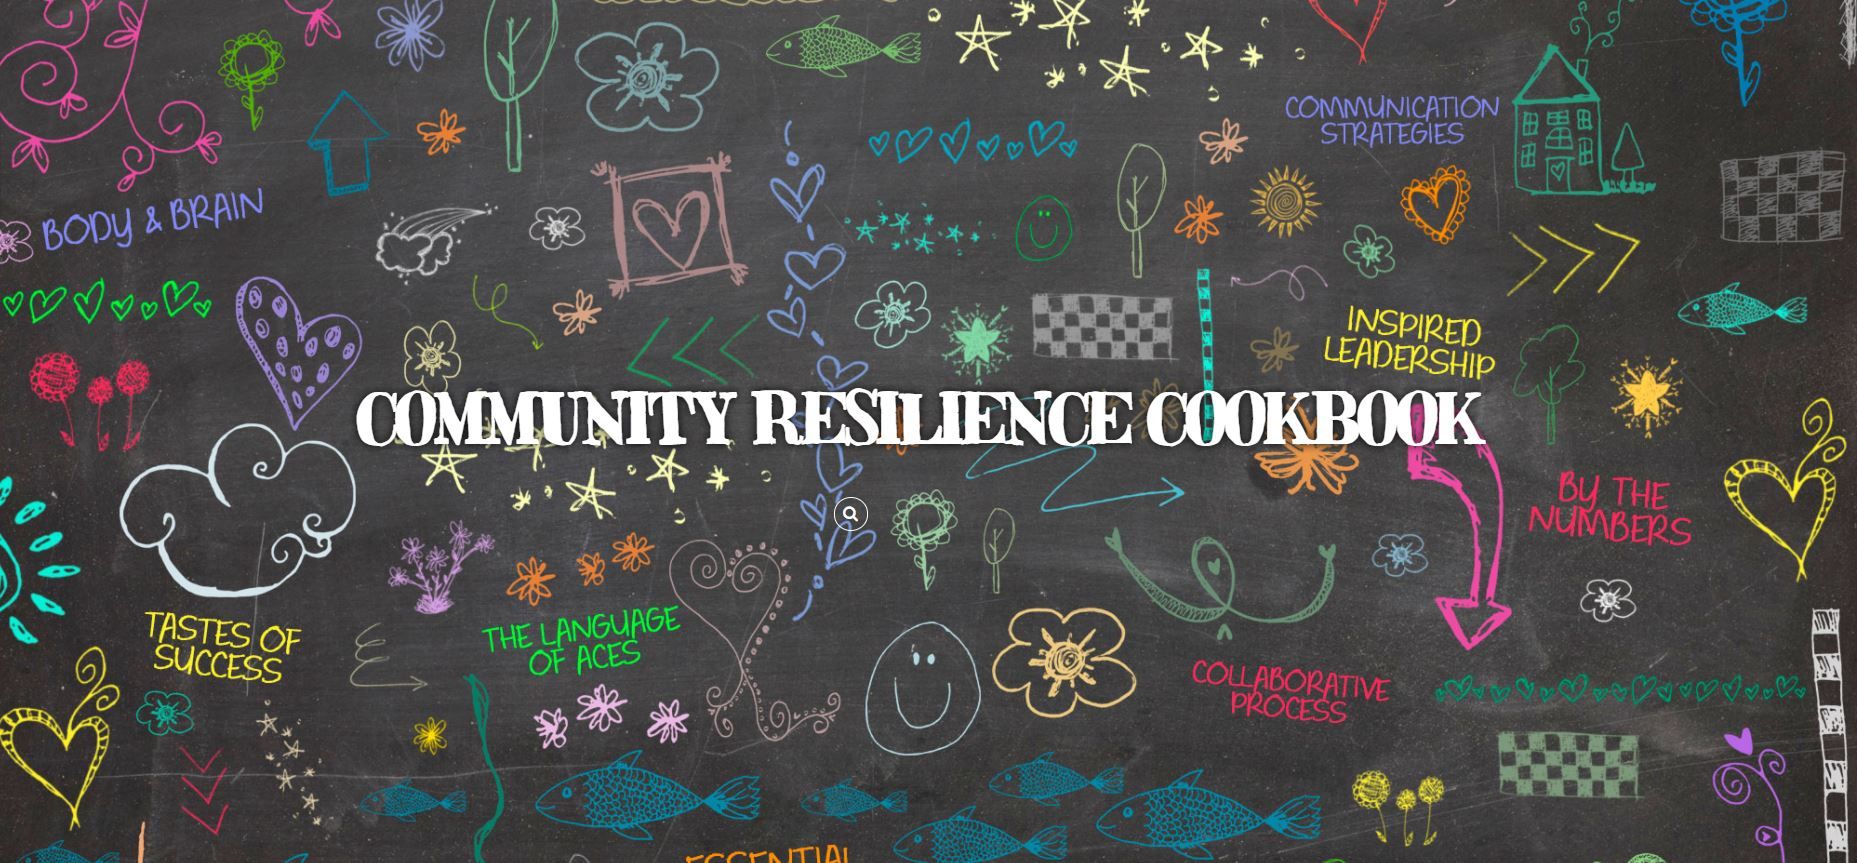 The Community Resilience Cookbook